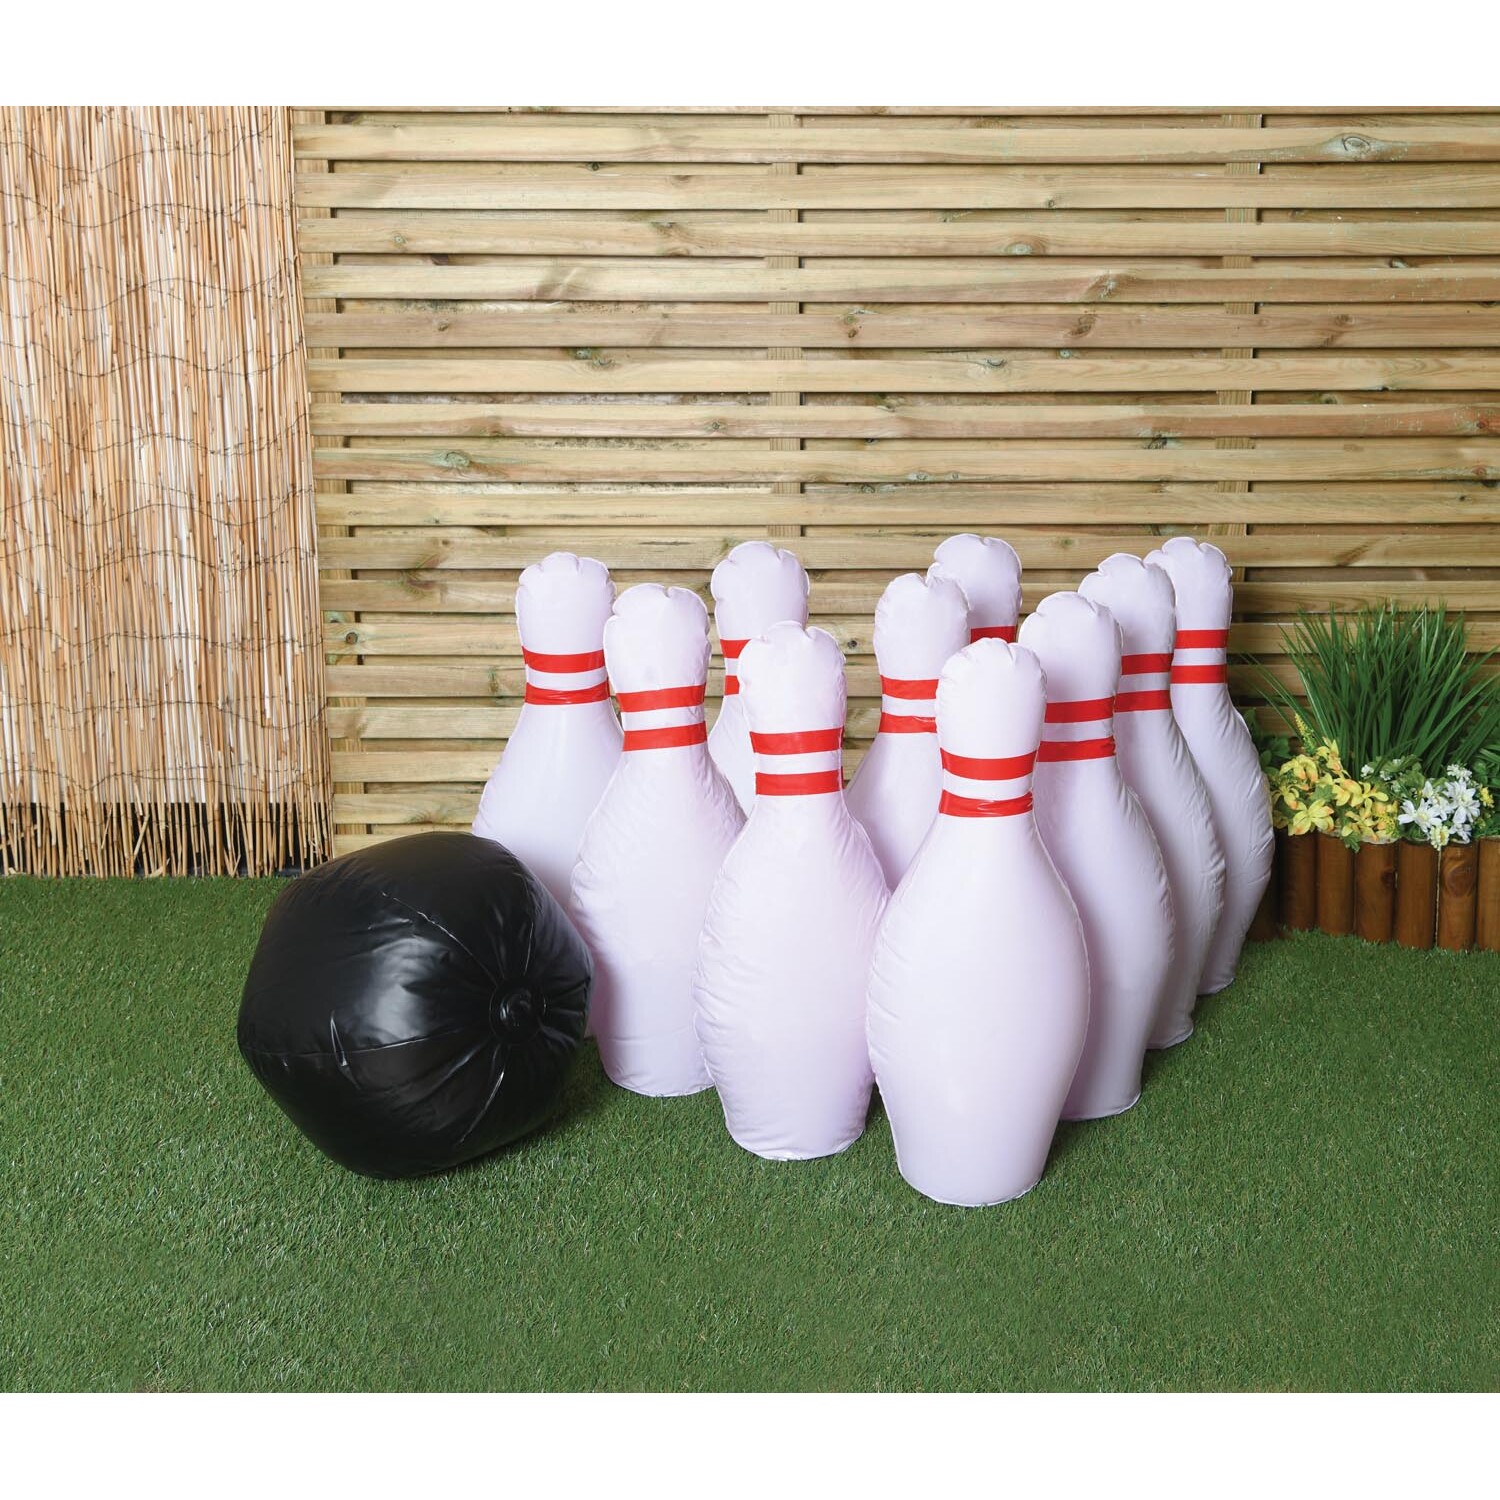 Inflatable Bowling Set - White Image 2